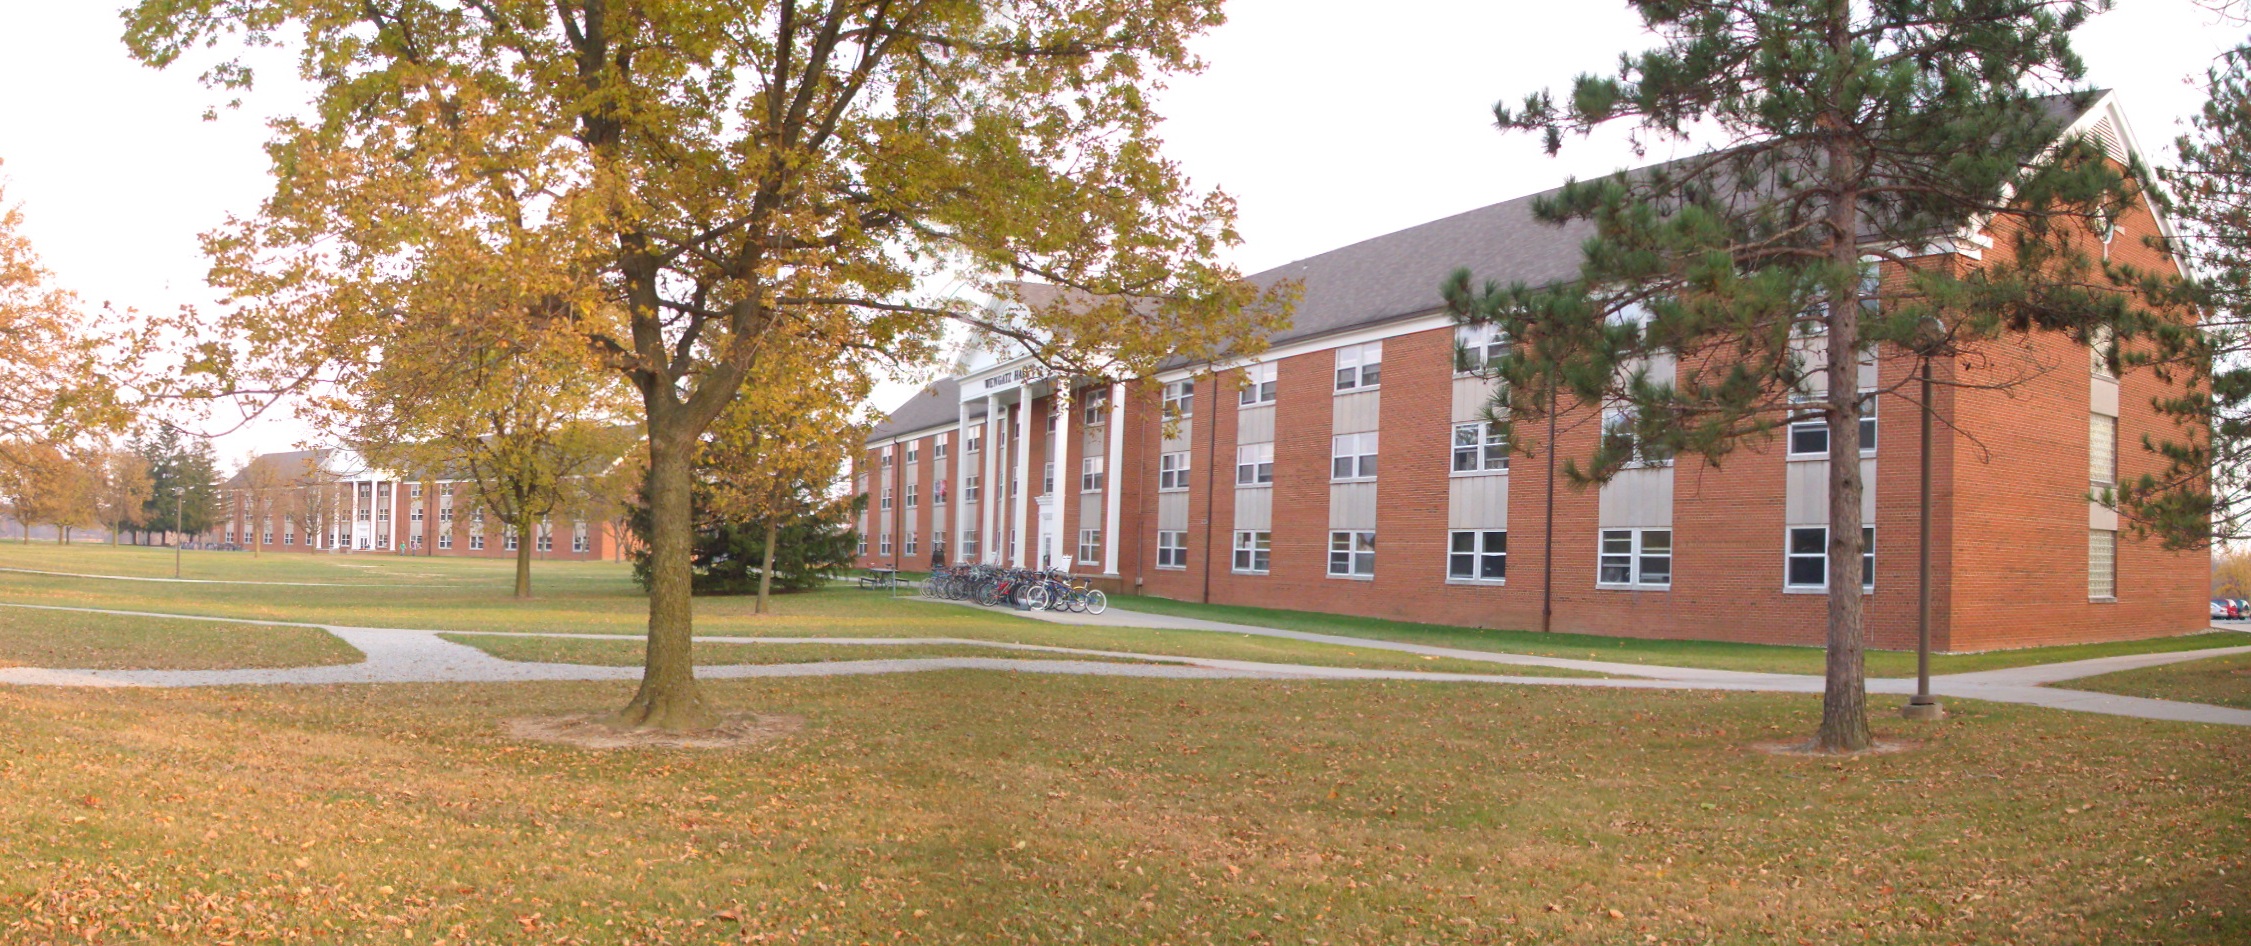 Olson Hall on the left and Wengatz Hall on the right at Taylor University